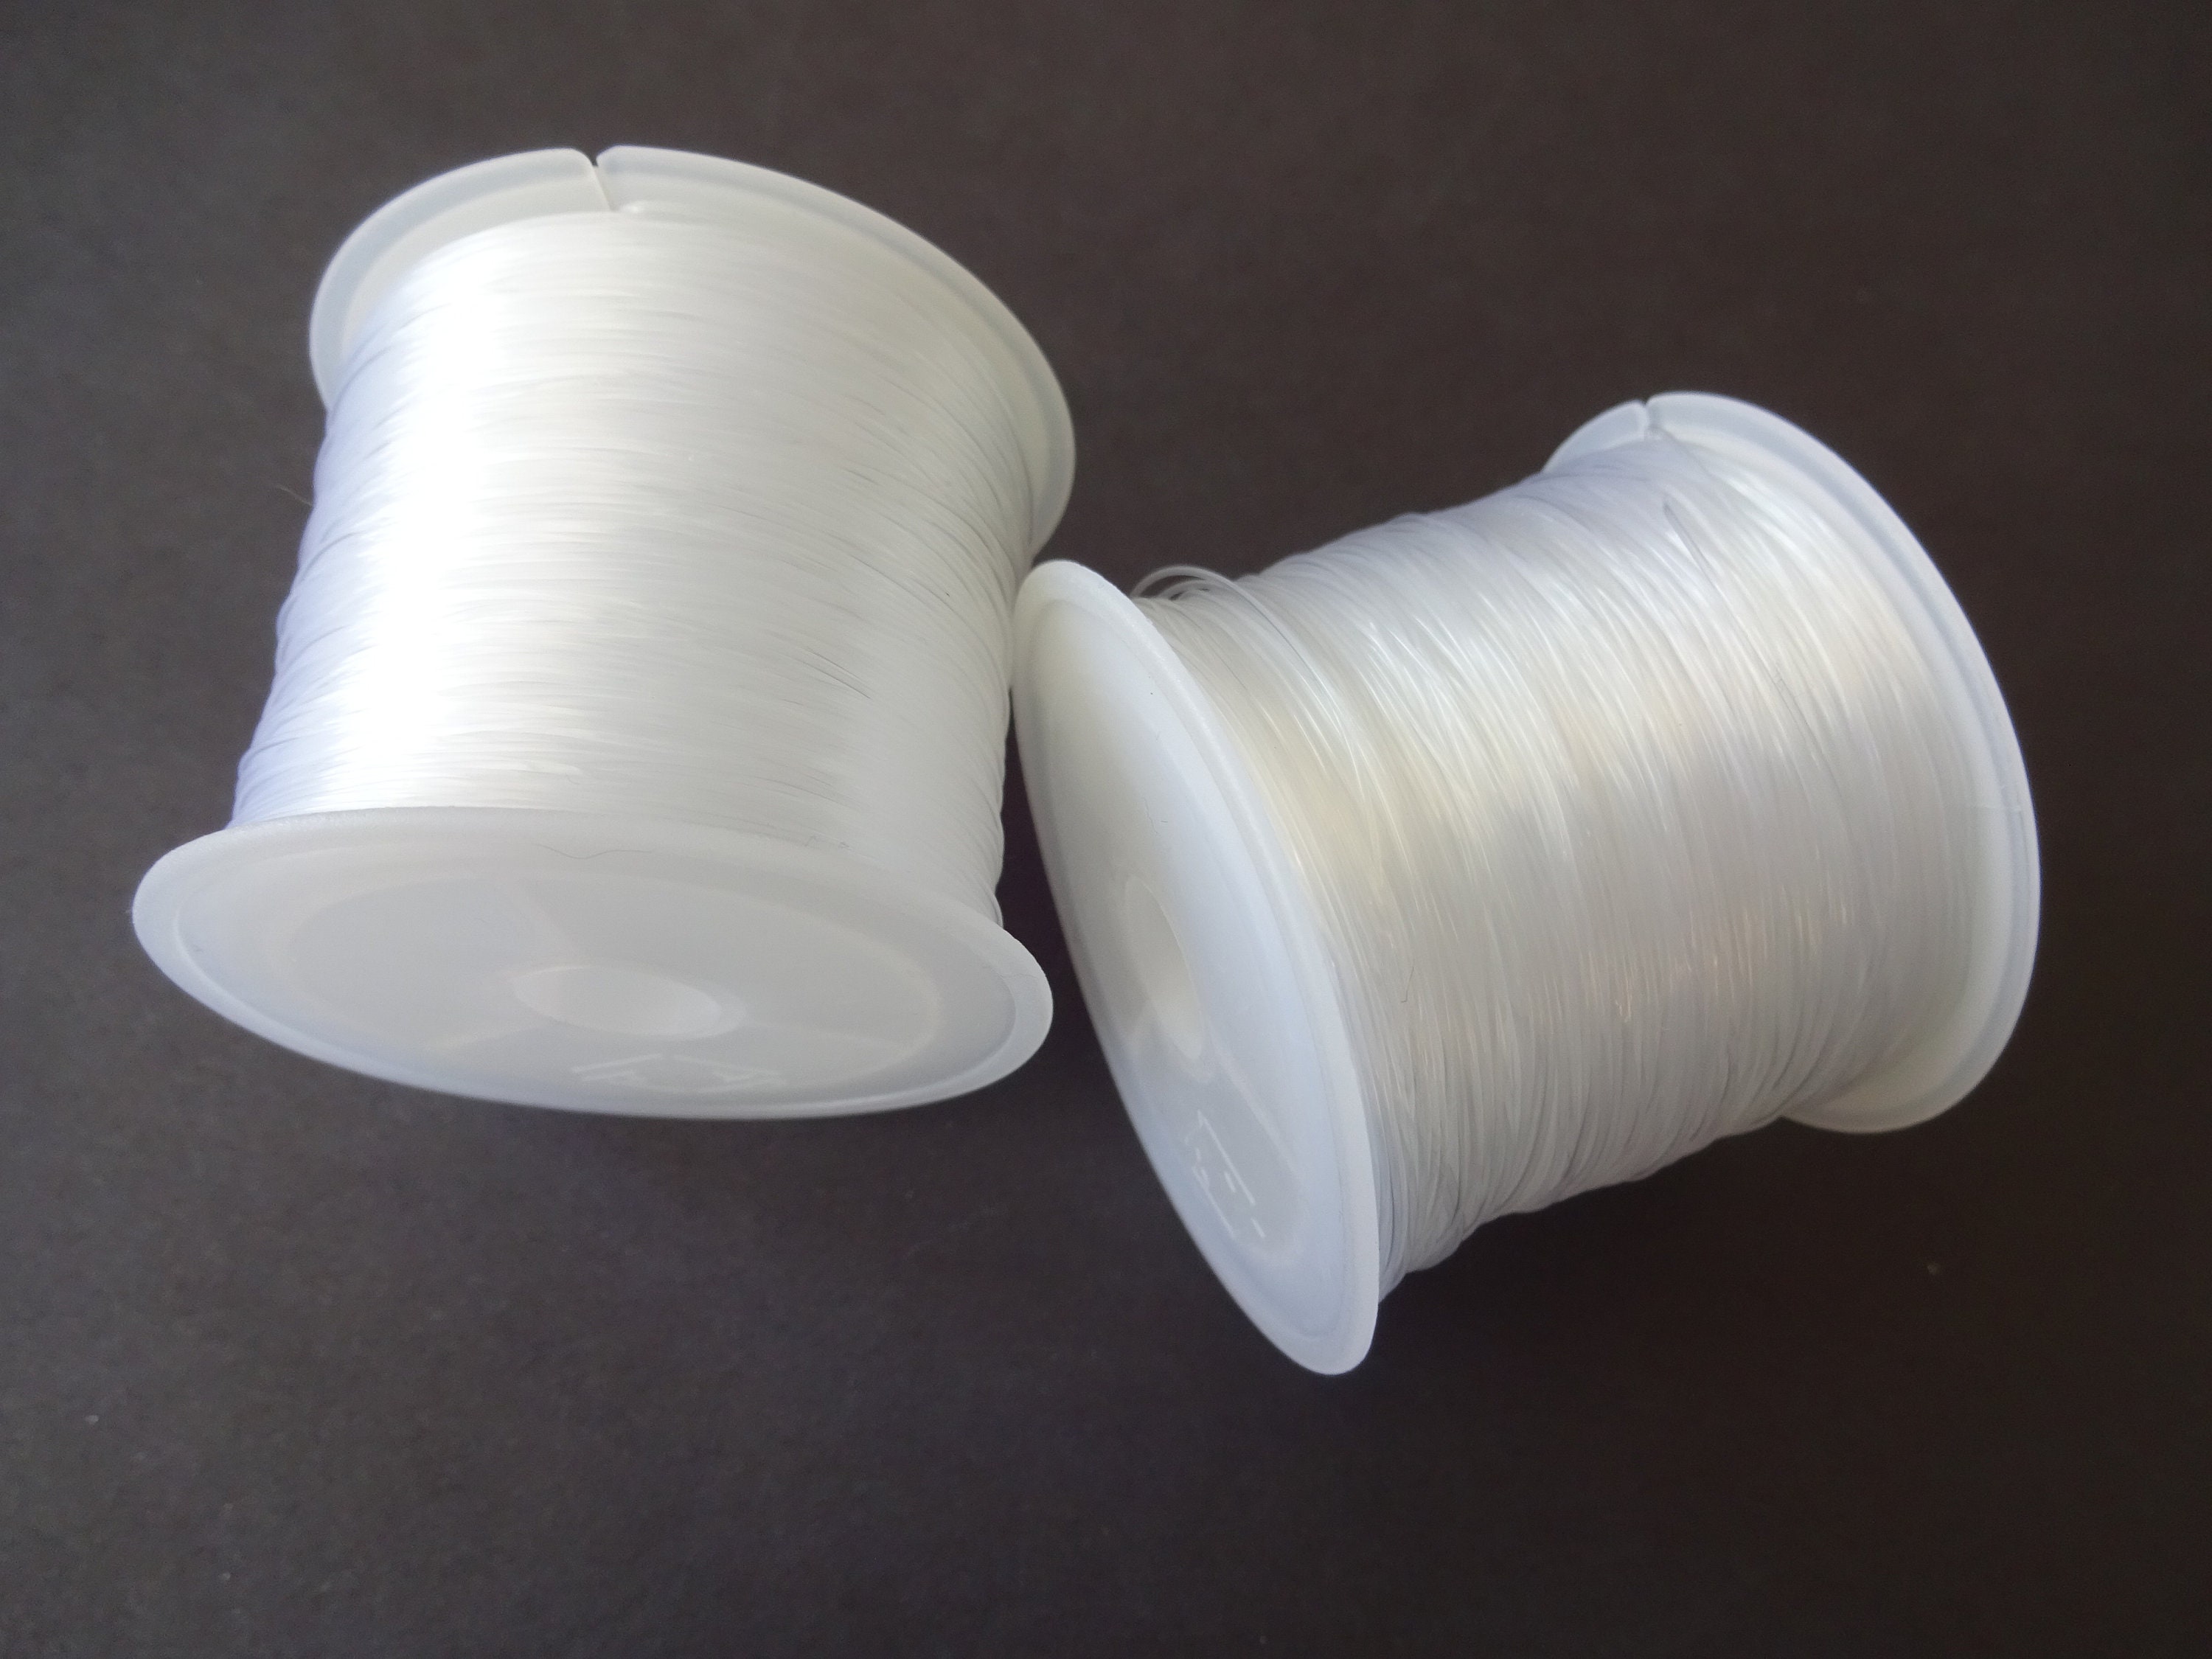 60 Meters Of 0.5mm Nylon Wire, Clear, Fishing Thread, Cord Bulk